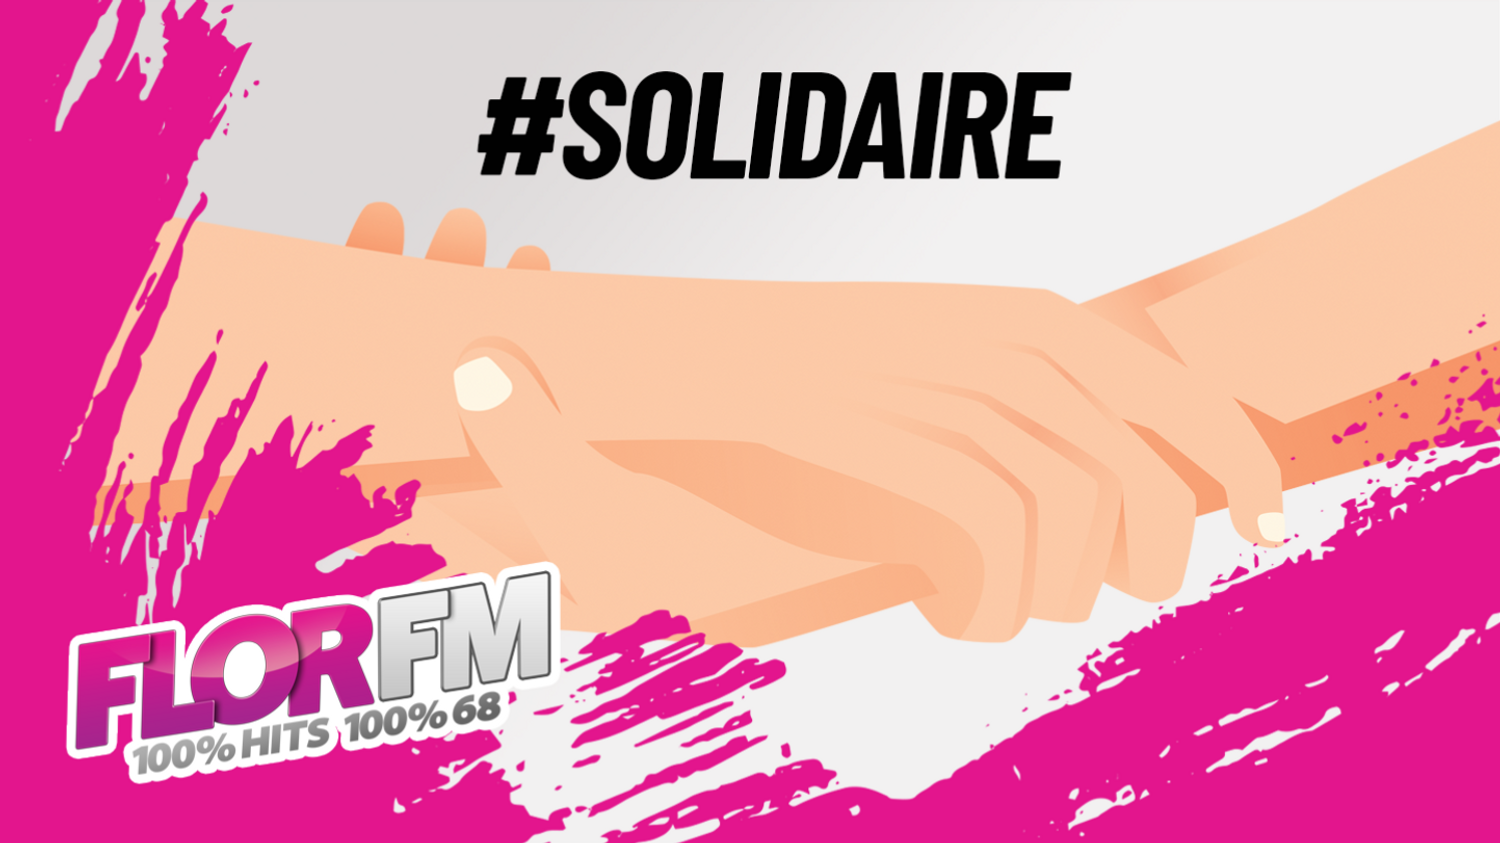 SOLIDAIRE